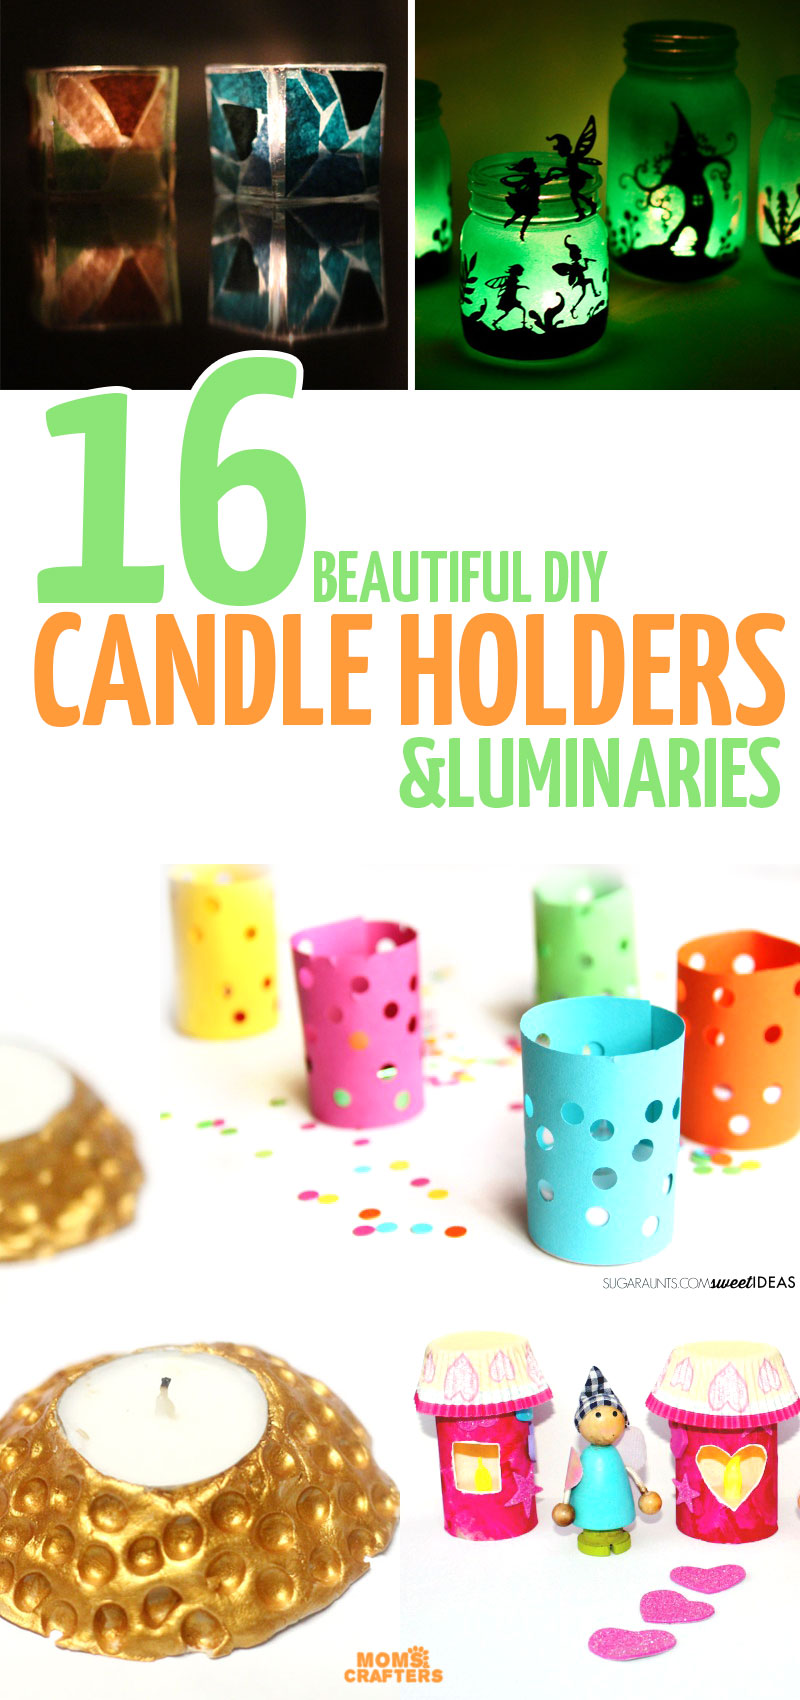 These DIY candle holders and lanterns are beautiful and easy to make! INcluding ideas for winter, chrismas, and all year round - and for all ages and skill levels, including kids, teens, and grown-ups, easy ideas, advanced ideas. Click for more!